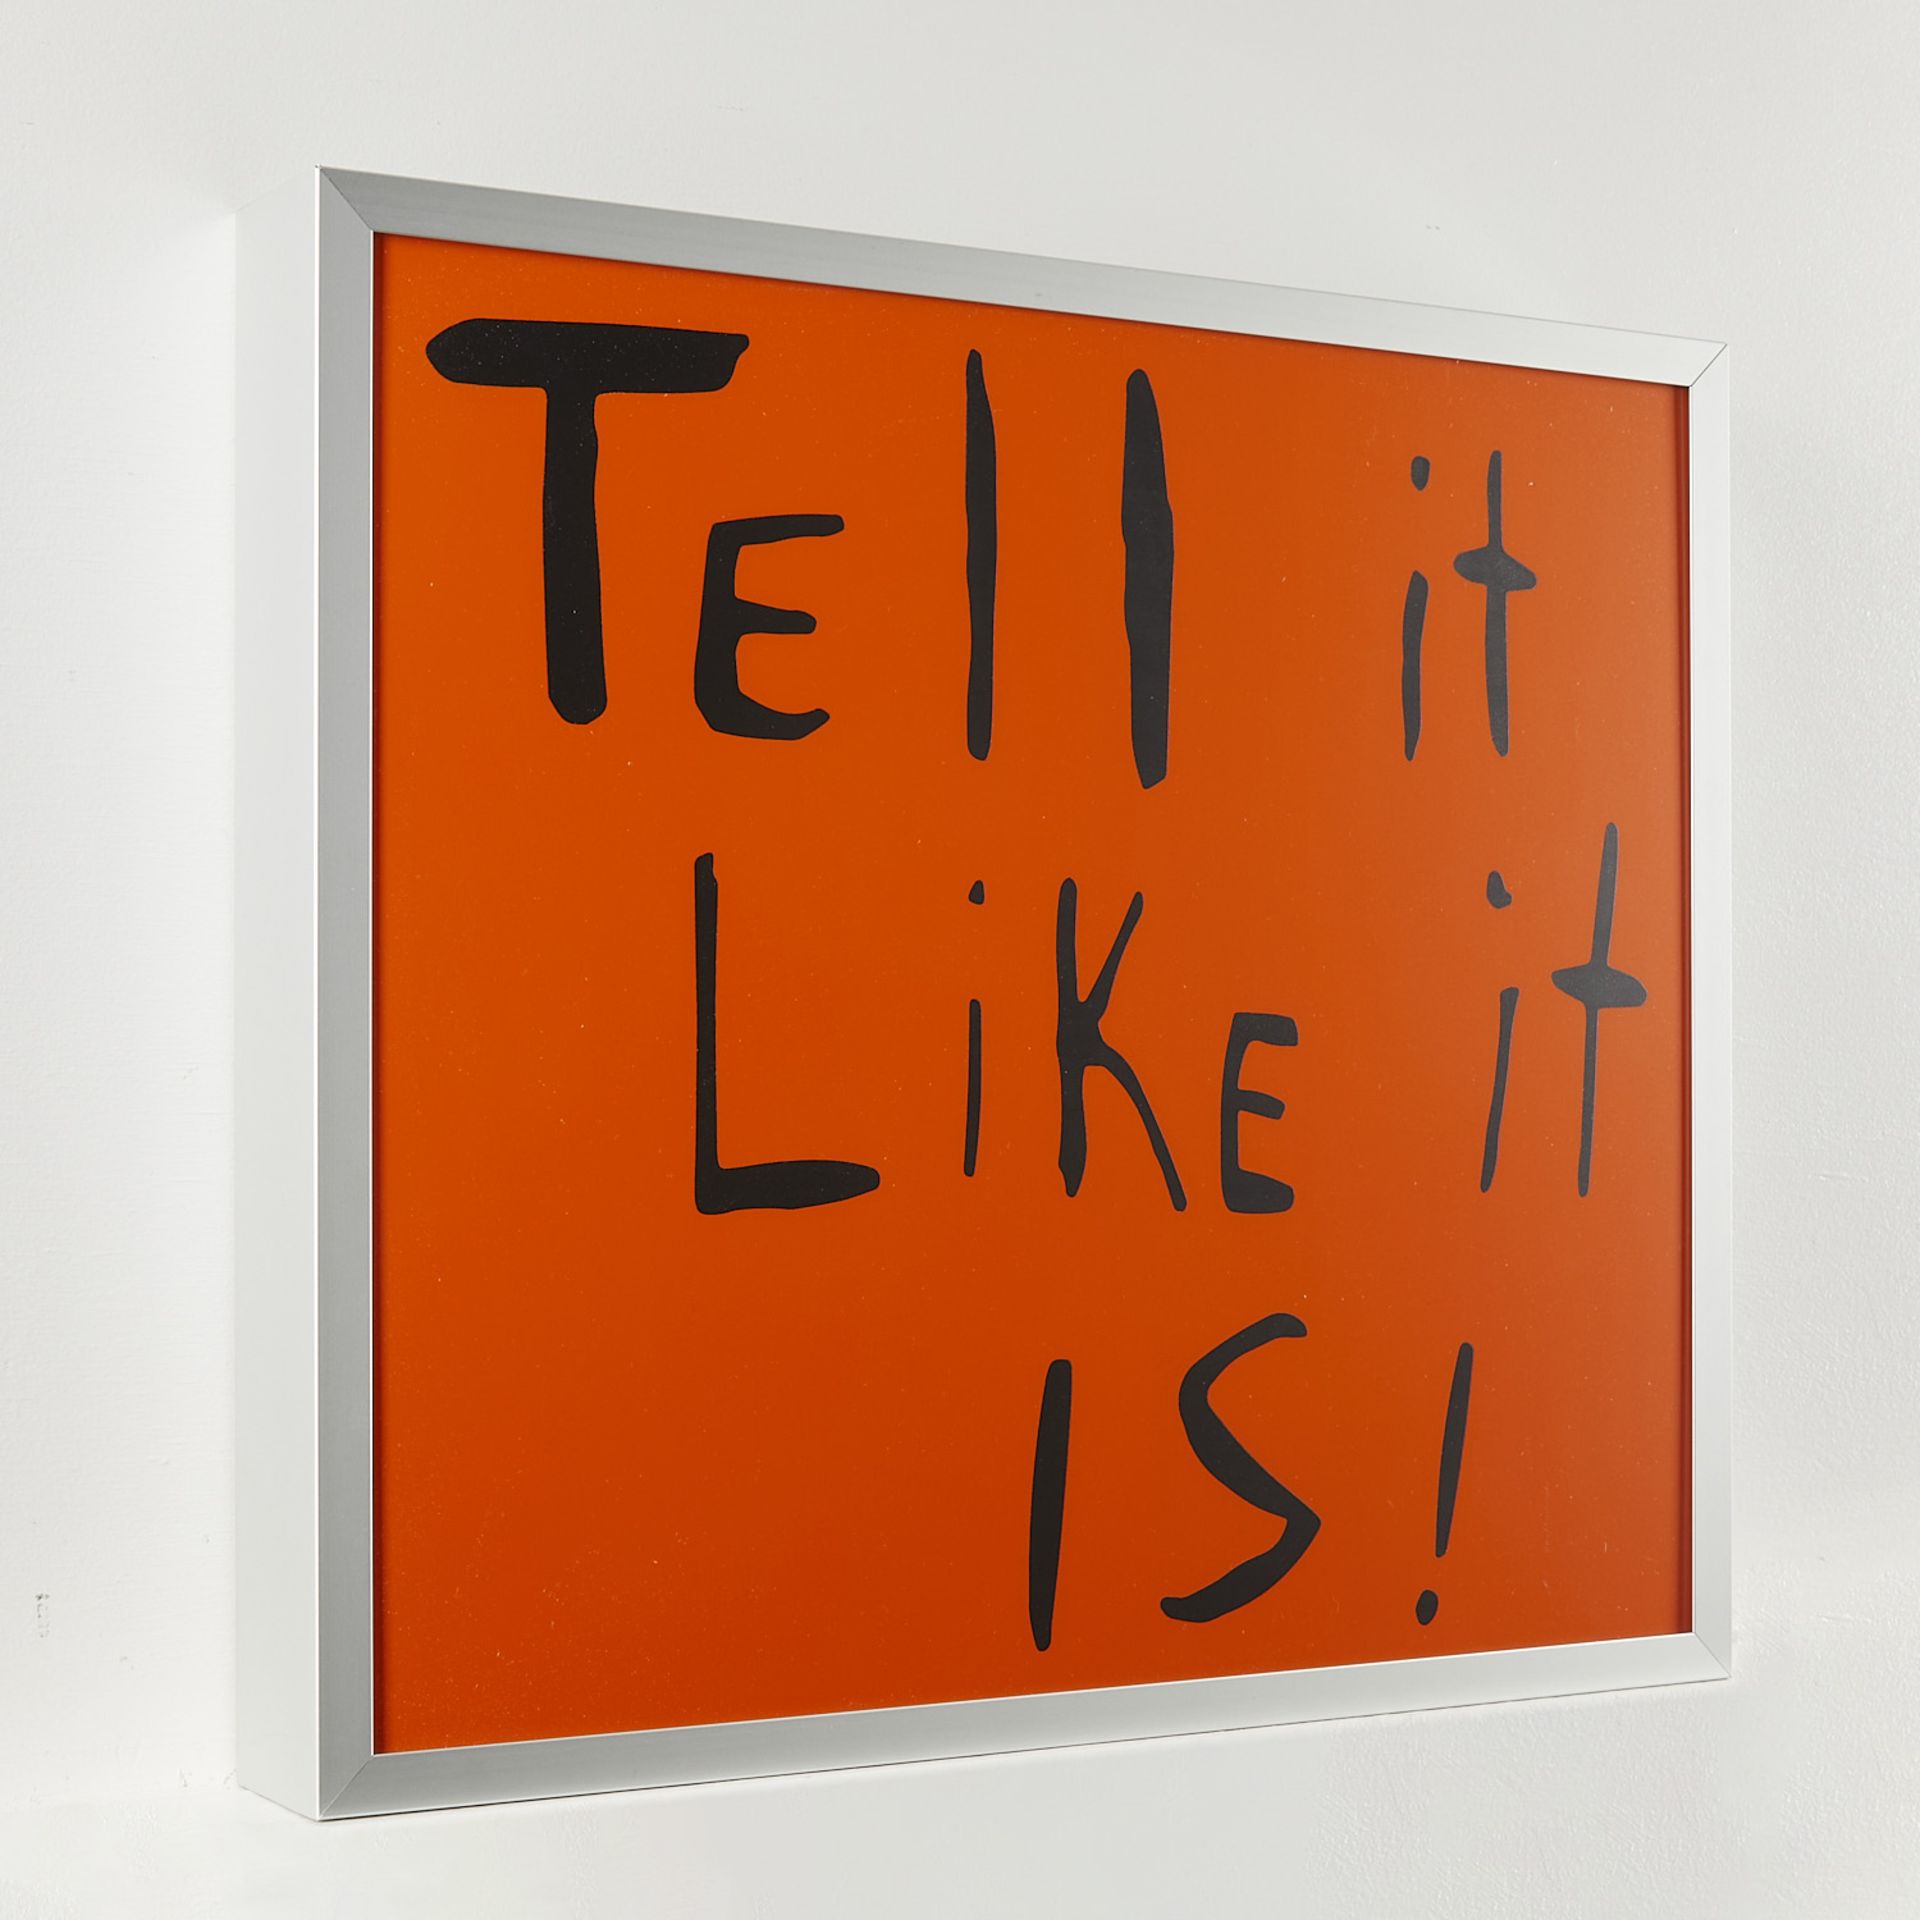 Sam Durant "Tell It Like It Is" Electric Sign 2020 - Image 7 of 11